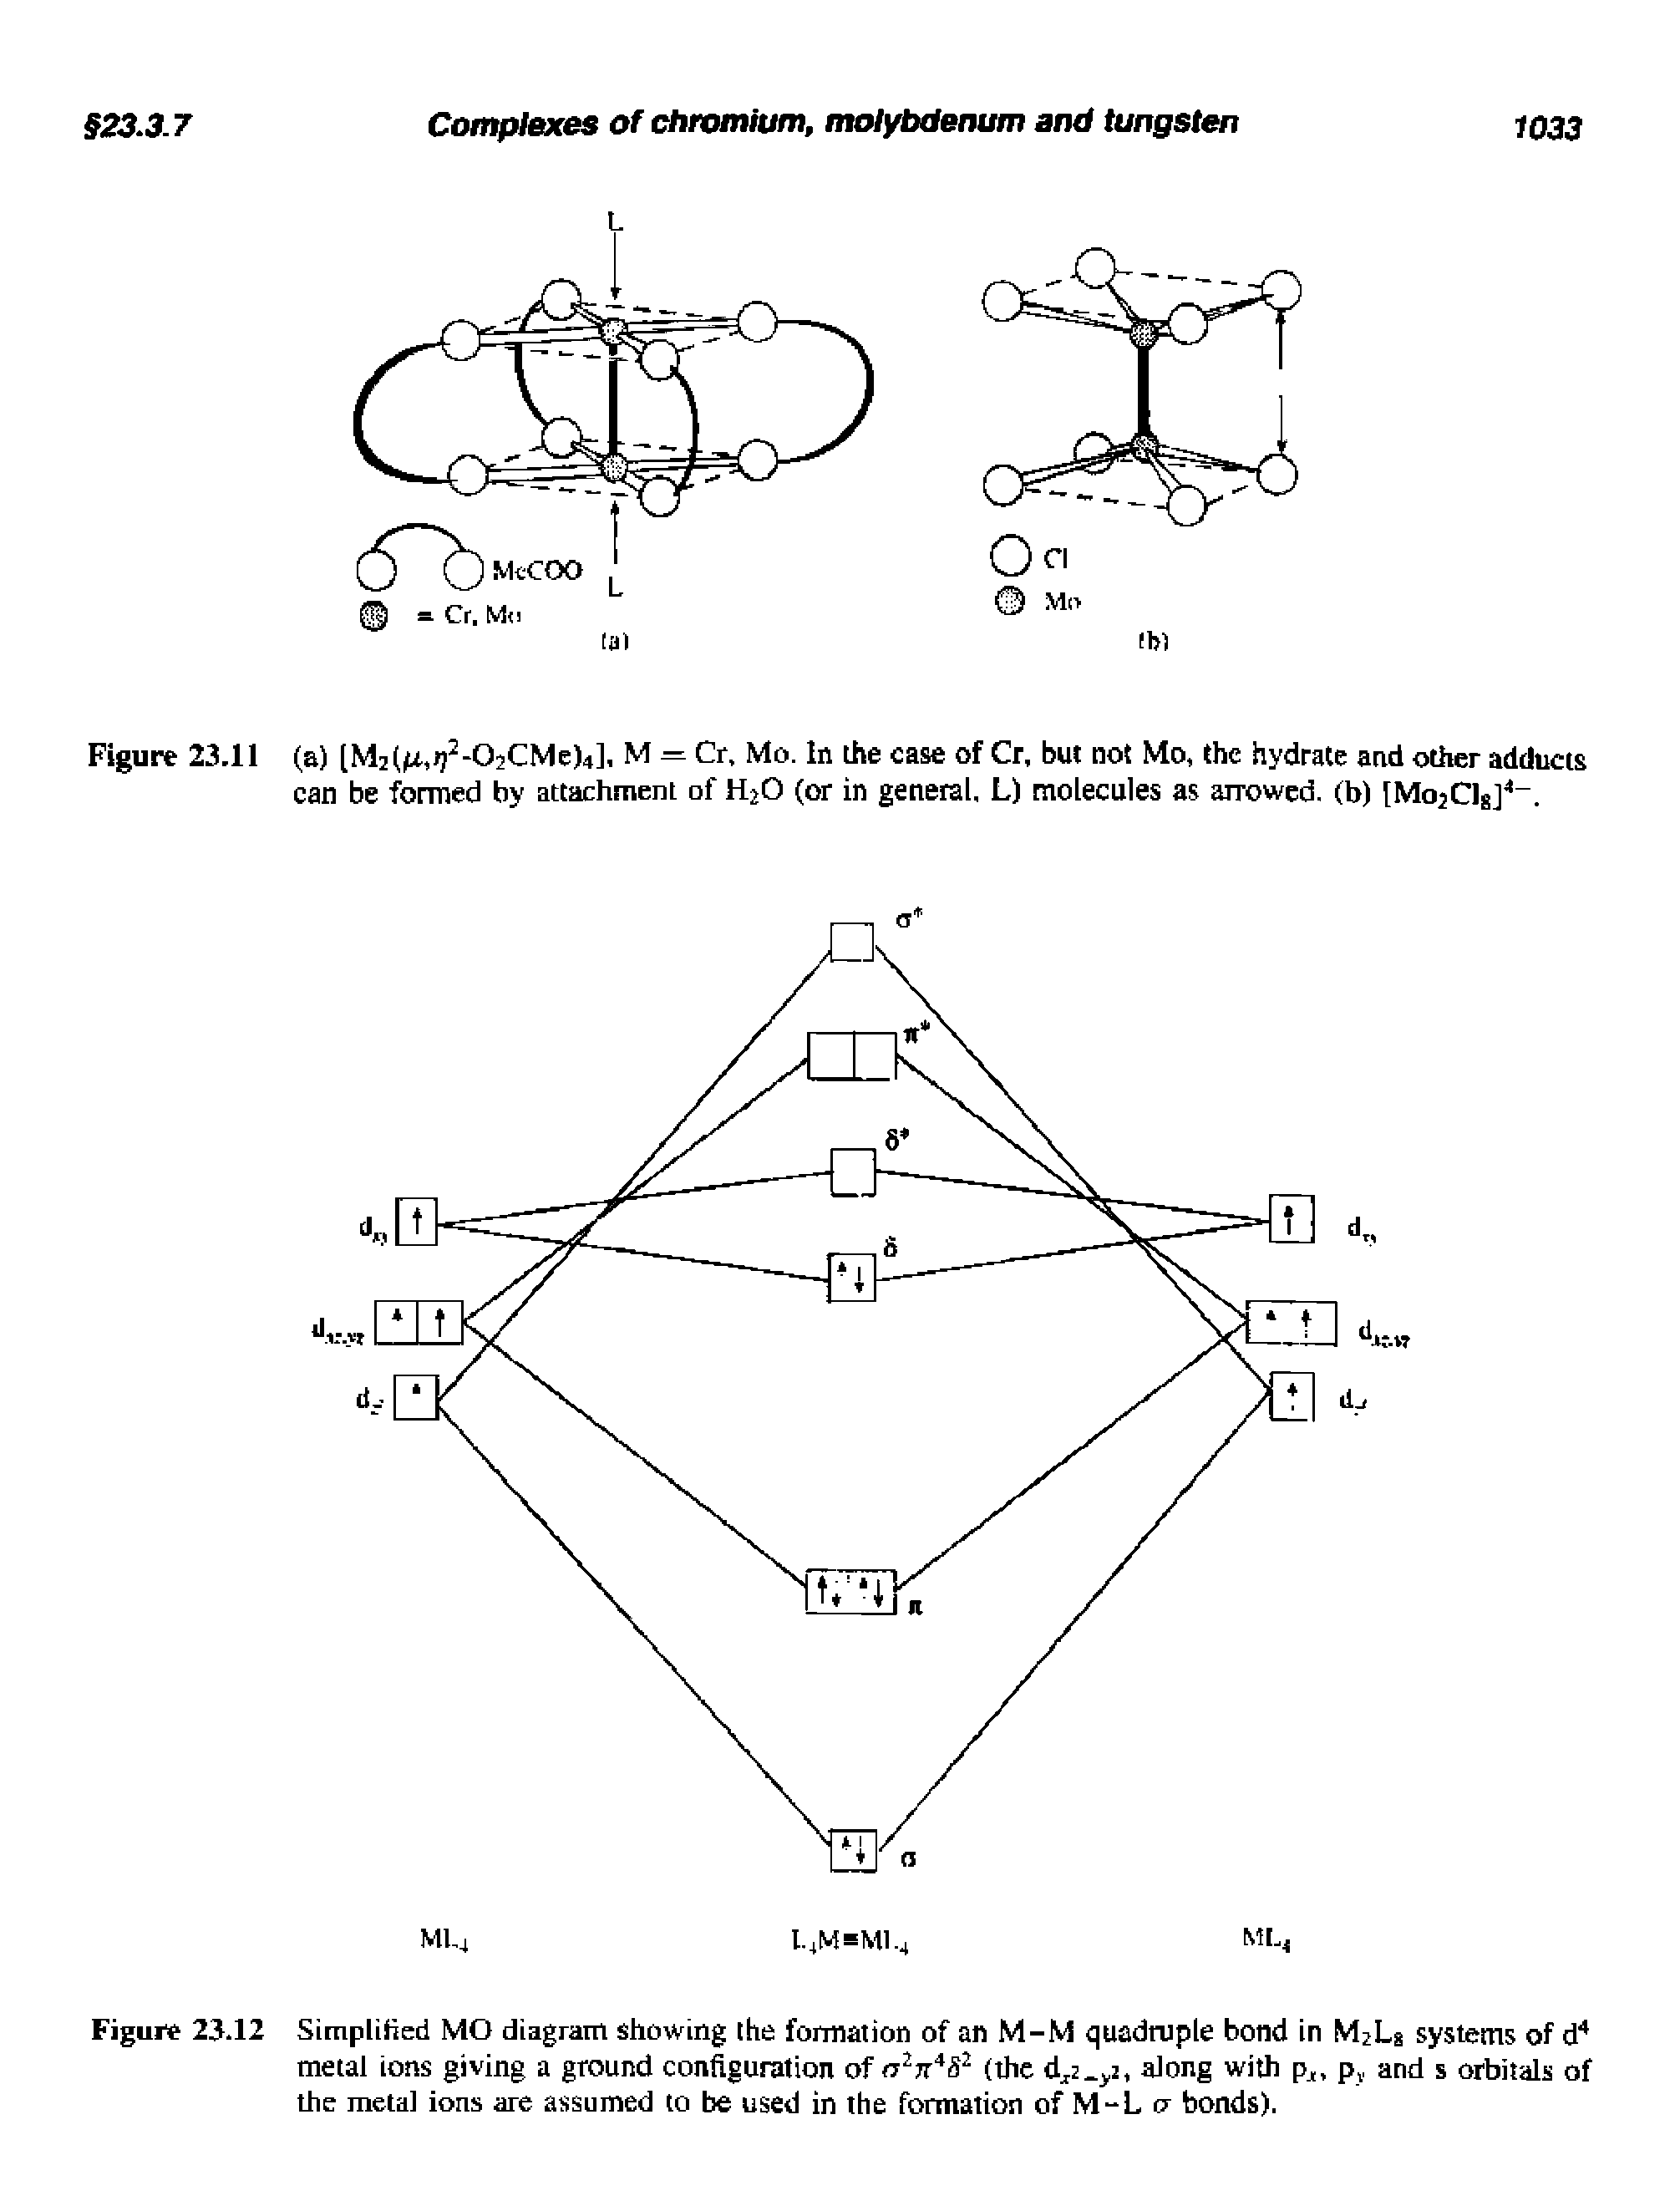 Figure 23.12 Simplified MO diagram showing the formation of an M-M quadruple bond in M Ls systems of d" metal ions giving a ground configuration of (the along with pj, p, and s orbitals of...